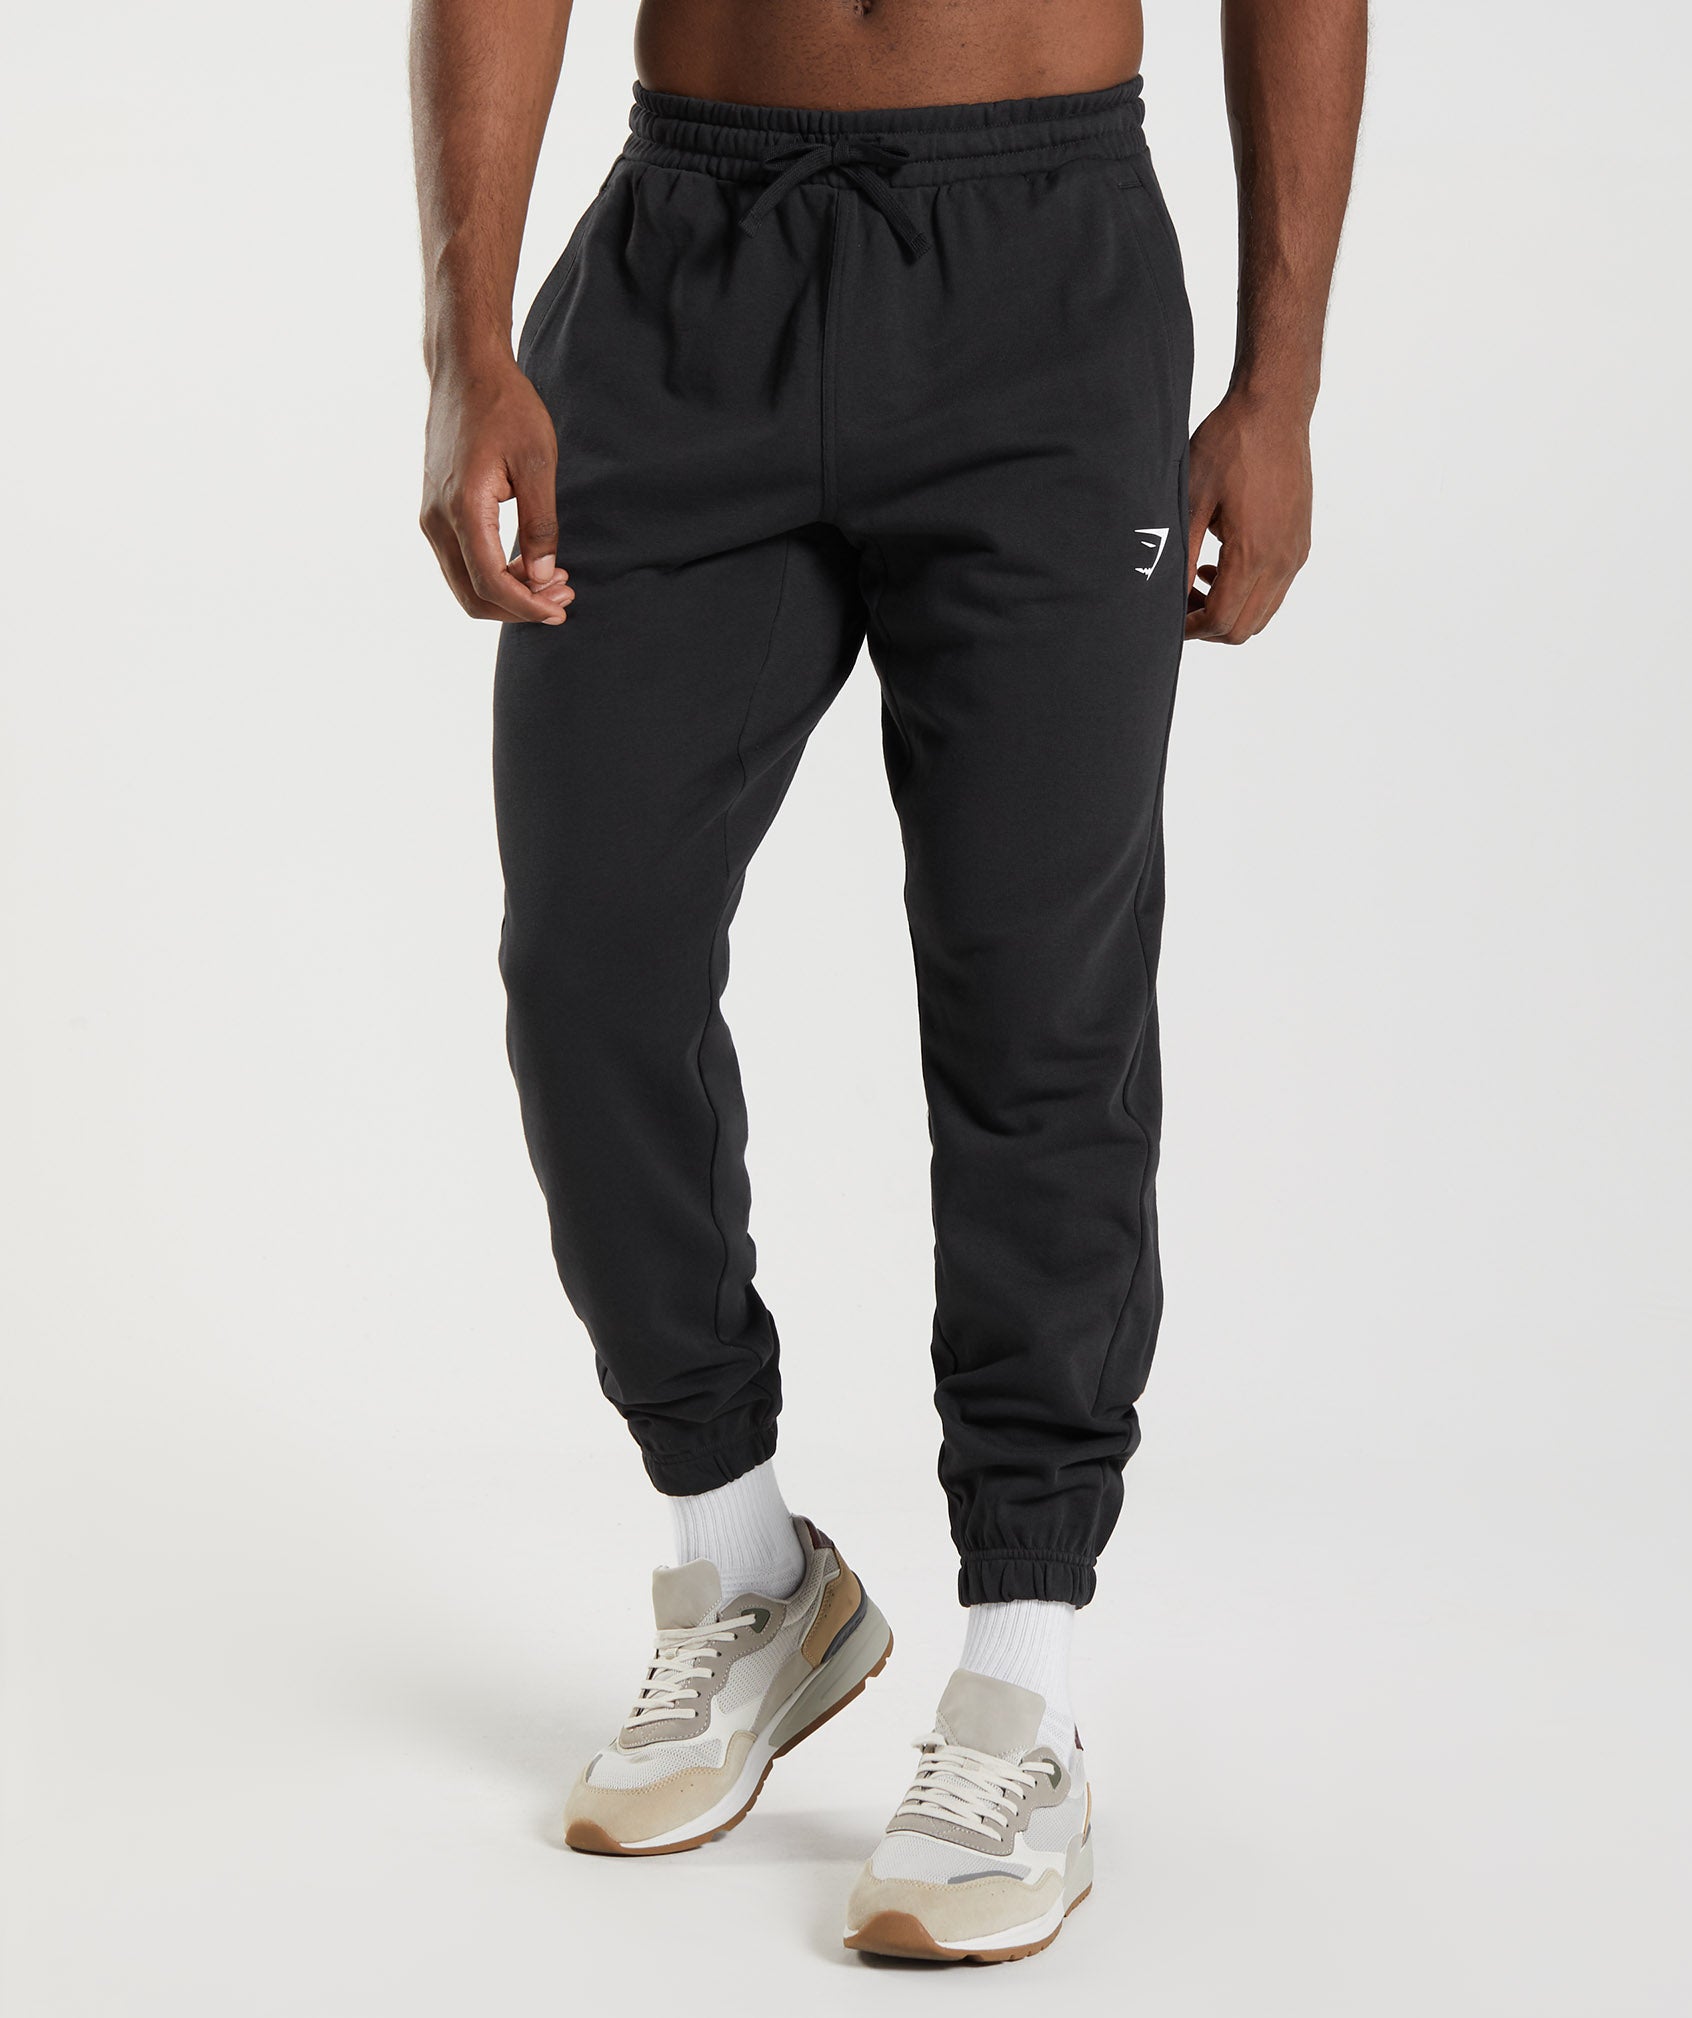 Men's Slim Fit Black Gym Joggers With Zip Up Pockets (UK) – Sole Ambition